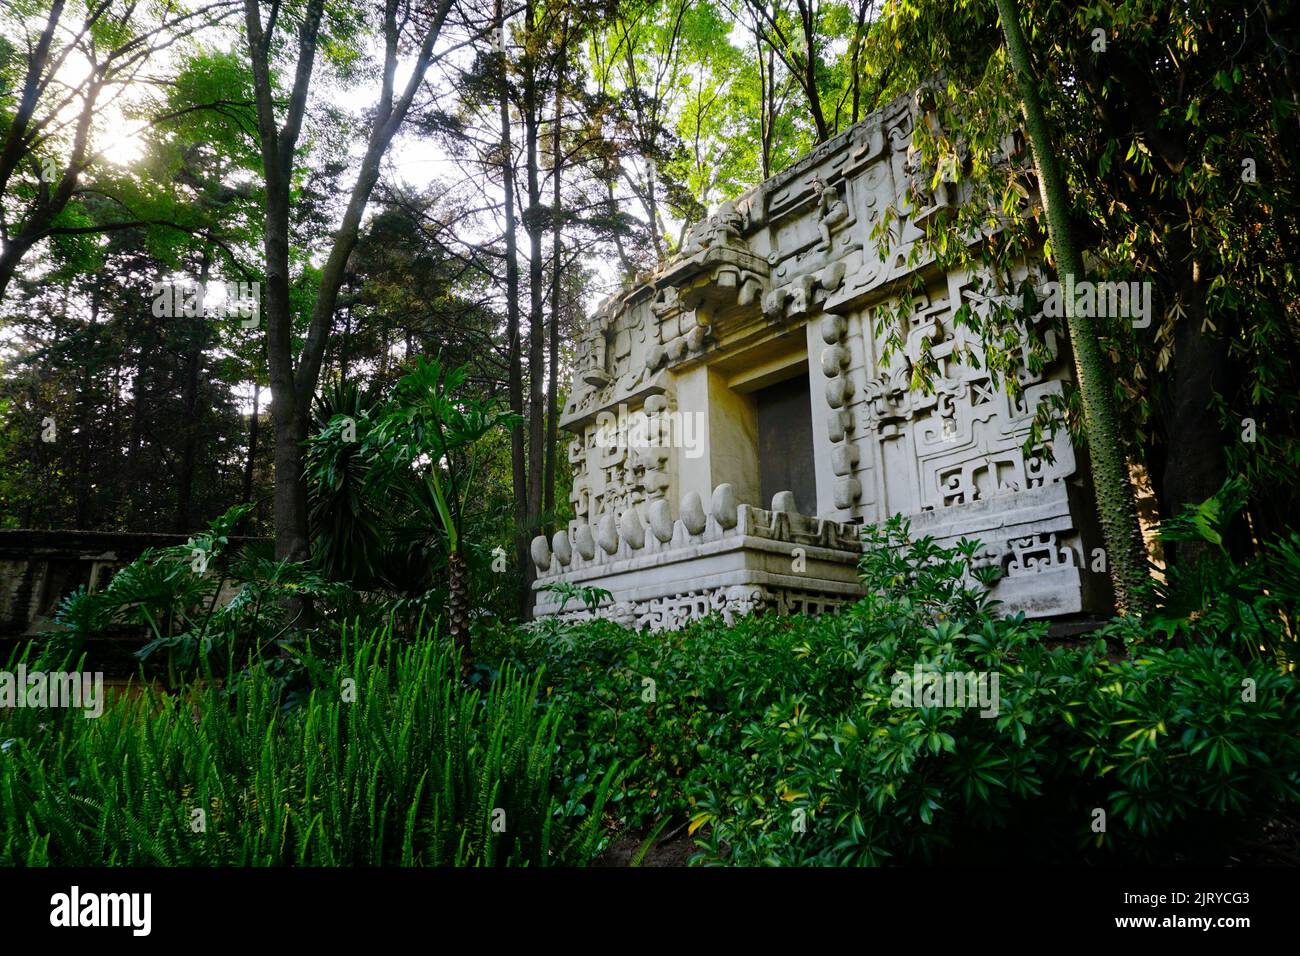 Full scale replica of the tomb of Mayan King Pakal, which was unearthed deep in the jungles of Palenque, National Anthropology Museum, Chapultepec Par Stock Photo